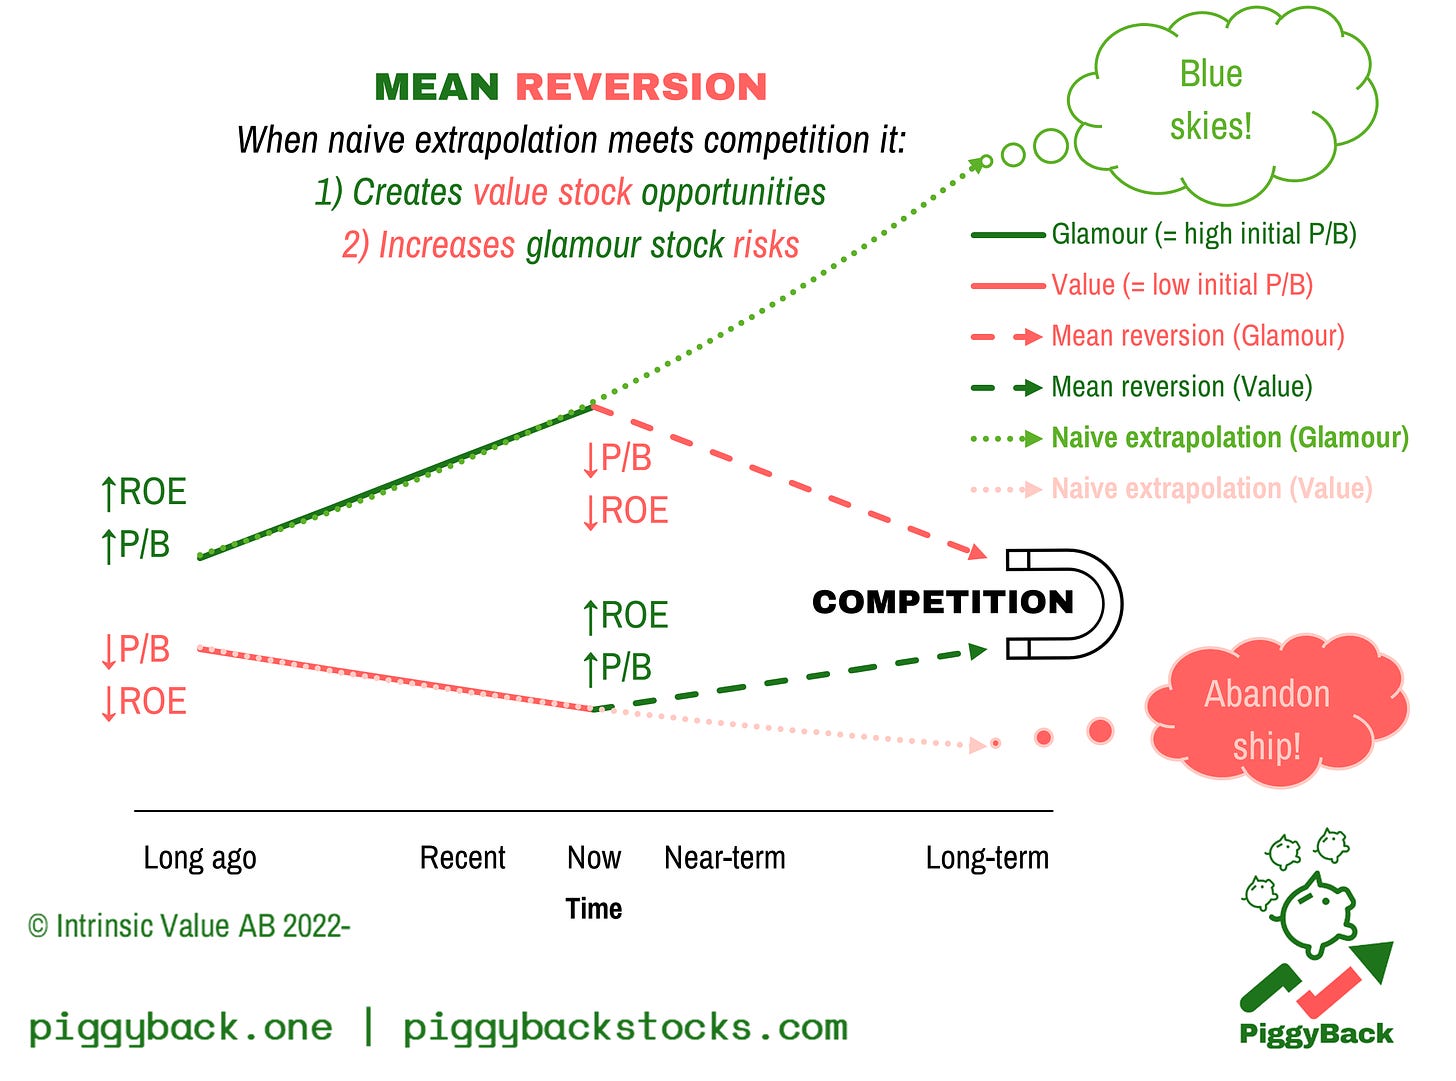 Chart 2: Why ROE and P/B mean reversion helps the value stock and hurts the glamour stock. Source: PiggyBack